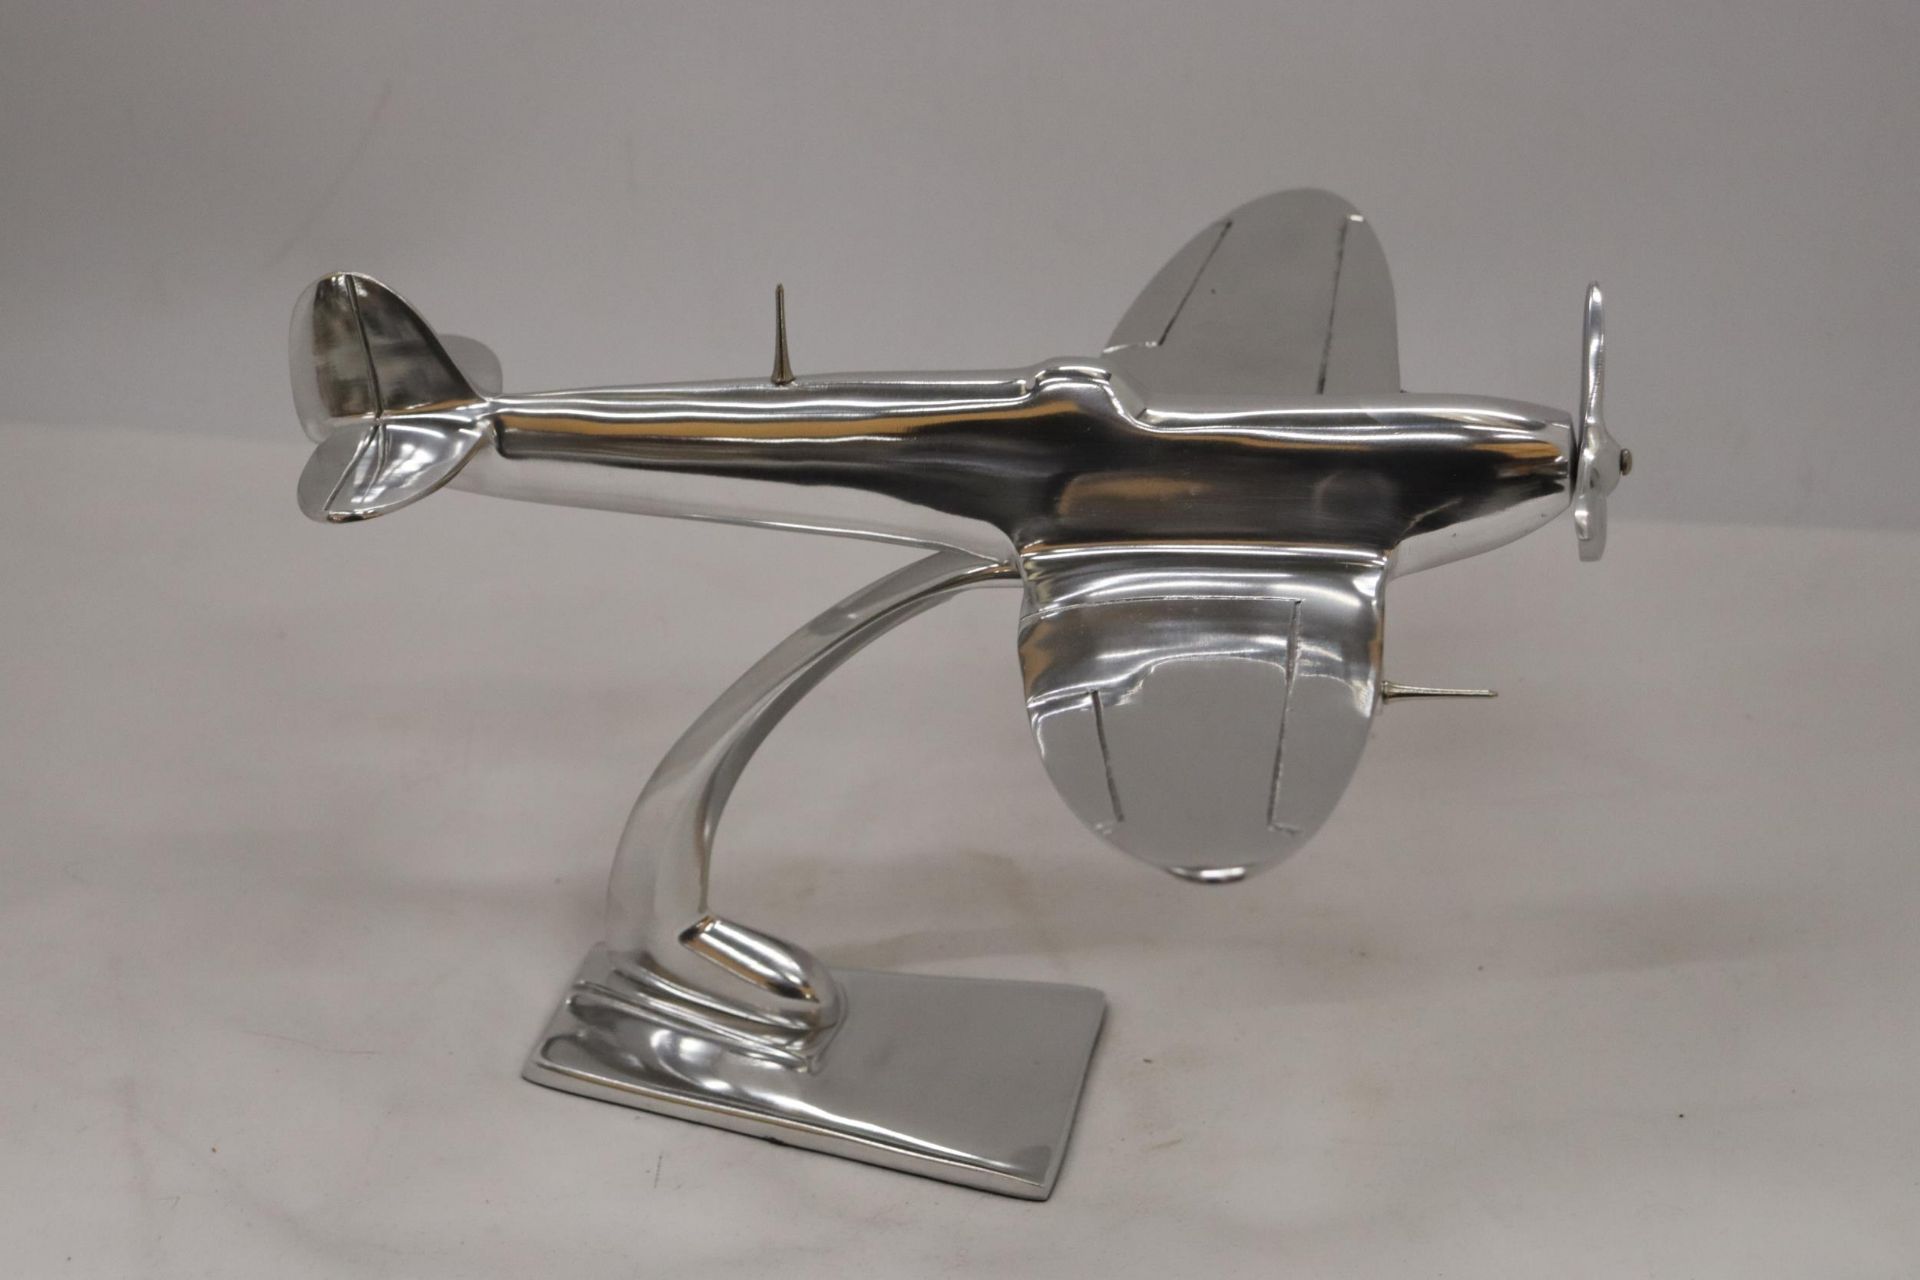 A LARGE CHROME SPITFIRE ON A STAND - Image 3 of 6